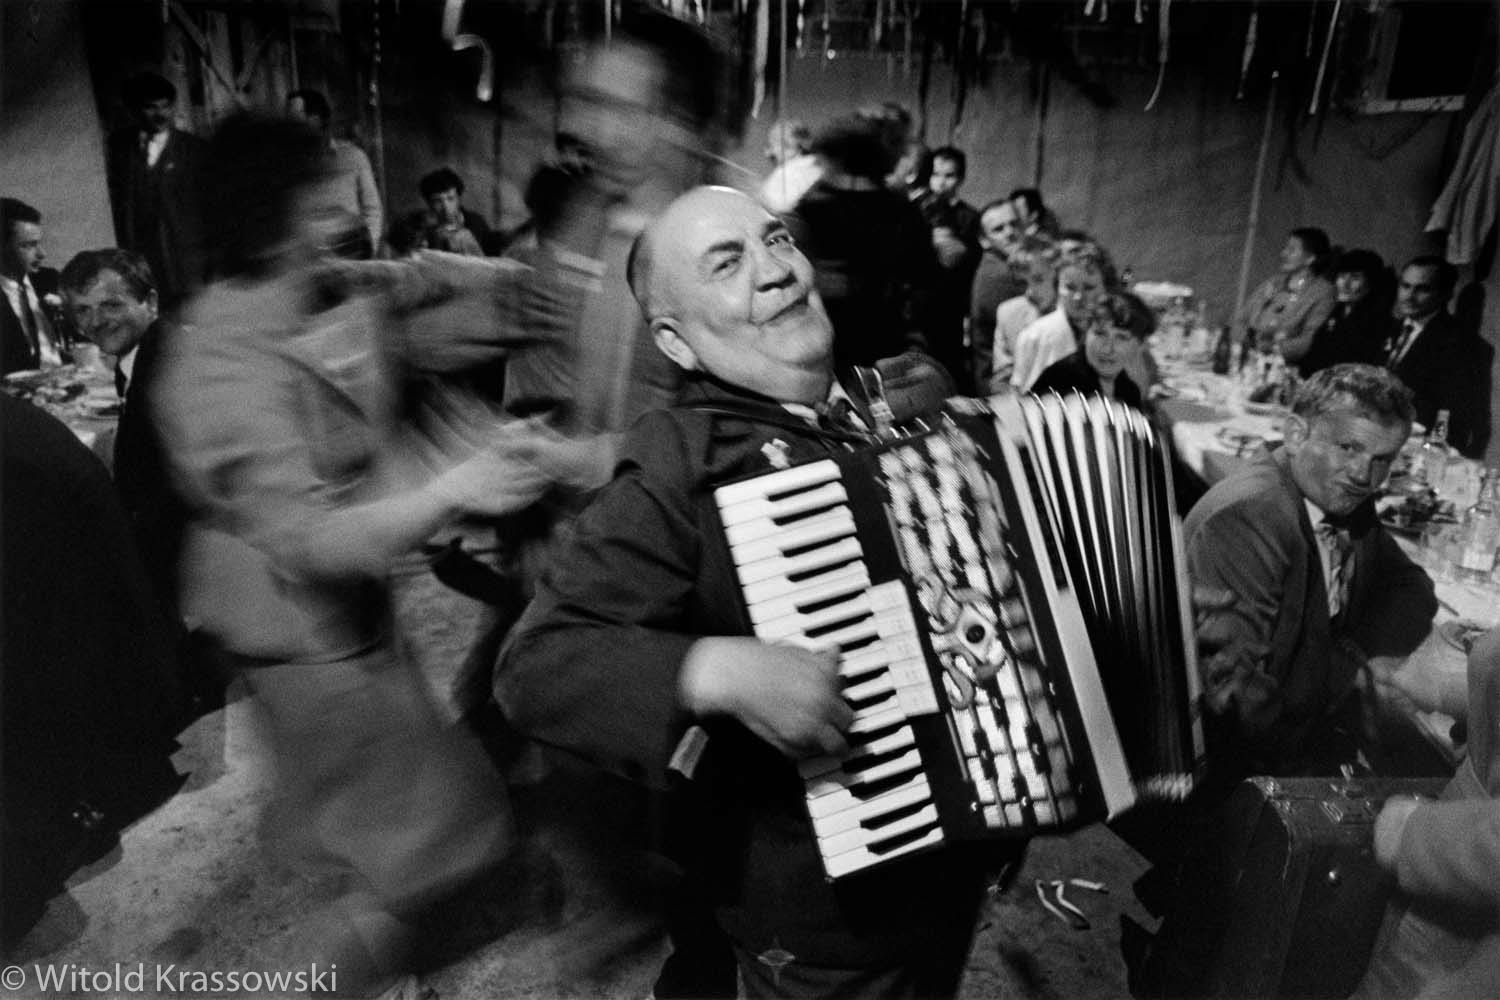  An accordion player during a wedding party in a small village near Tomaszow Lubelski, S-E Poland, 1989 